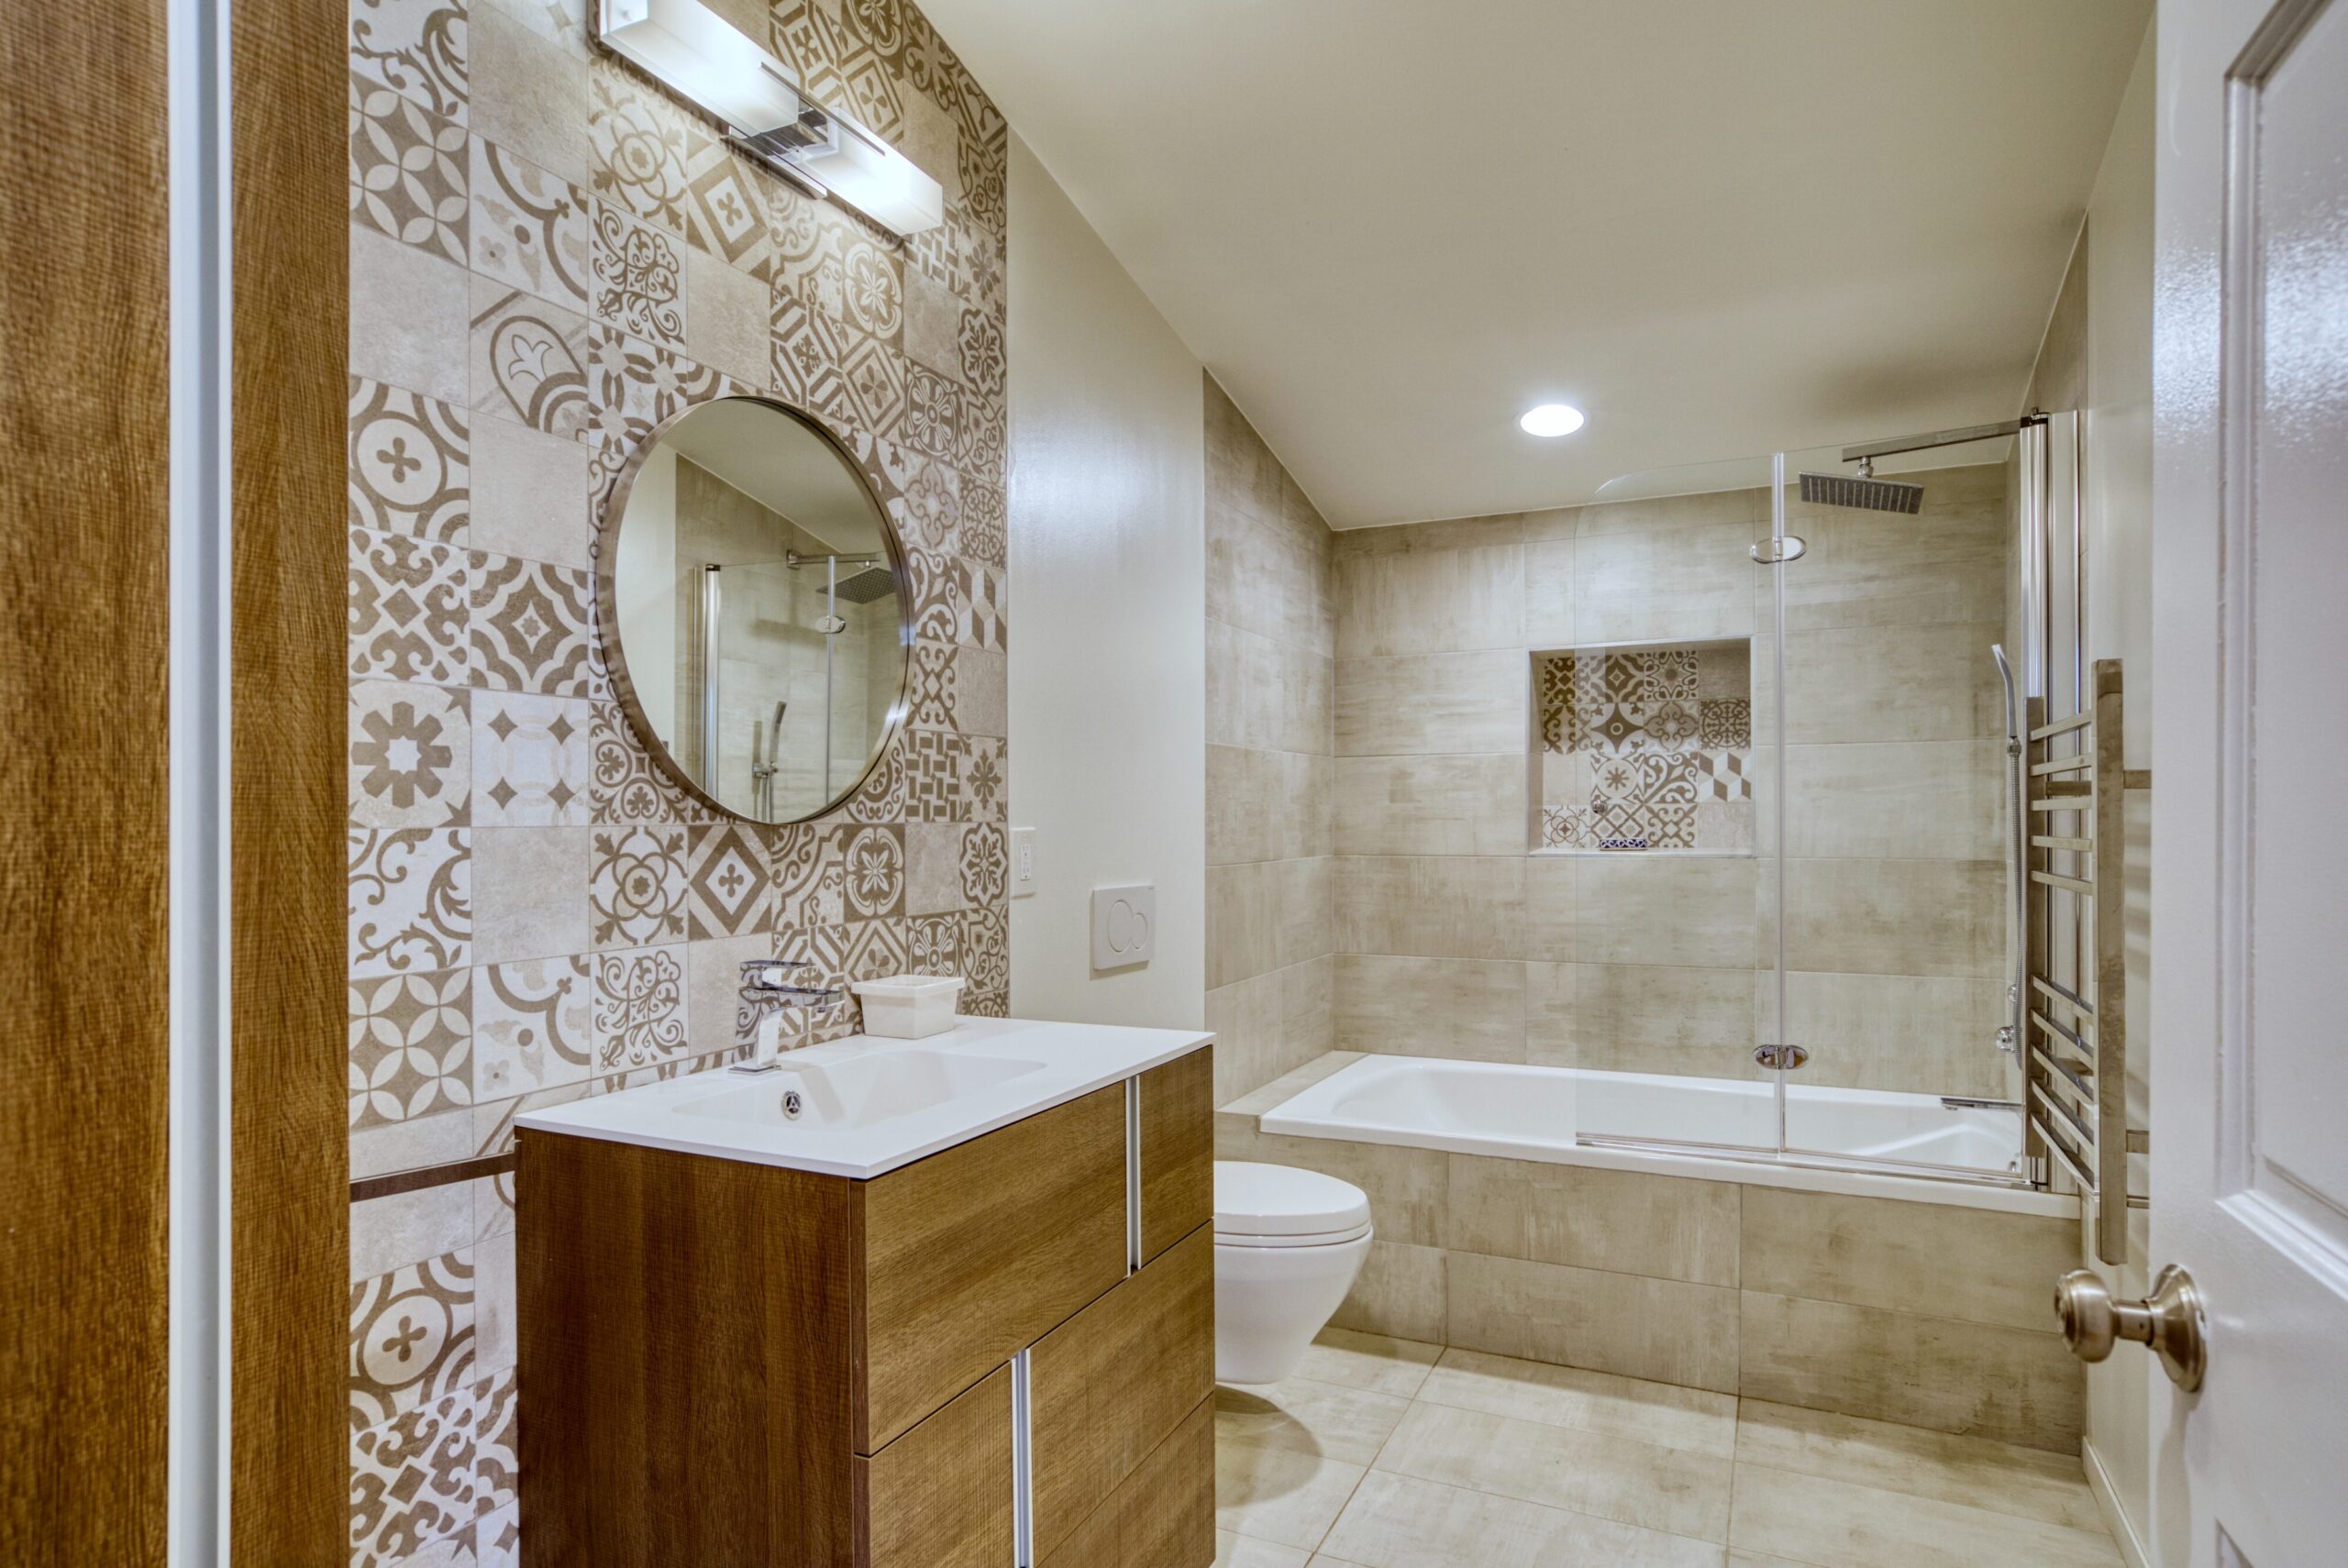 Interior professional photo of 1826 Varnum St NW - showing a bathroom with interesting tilework behind the vanity and in the tub/shower